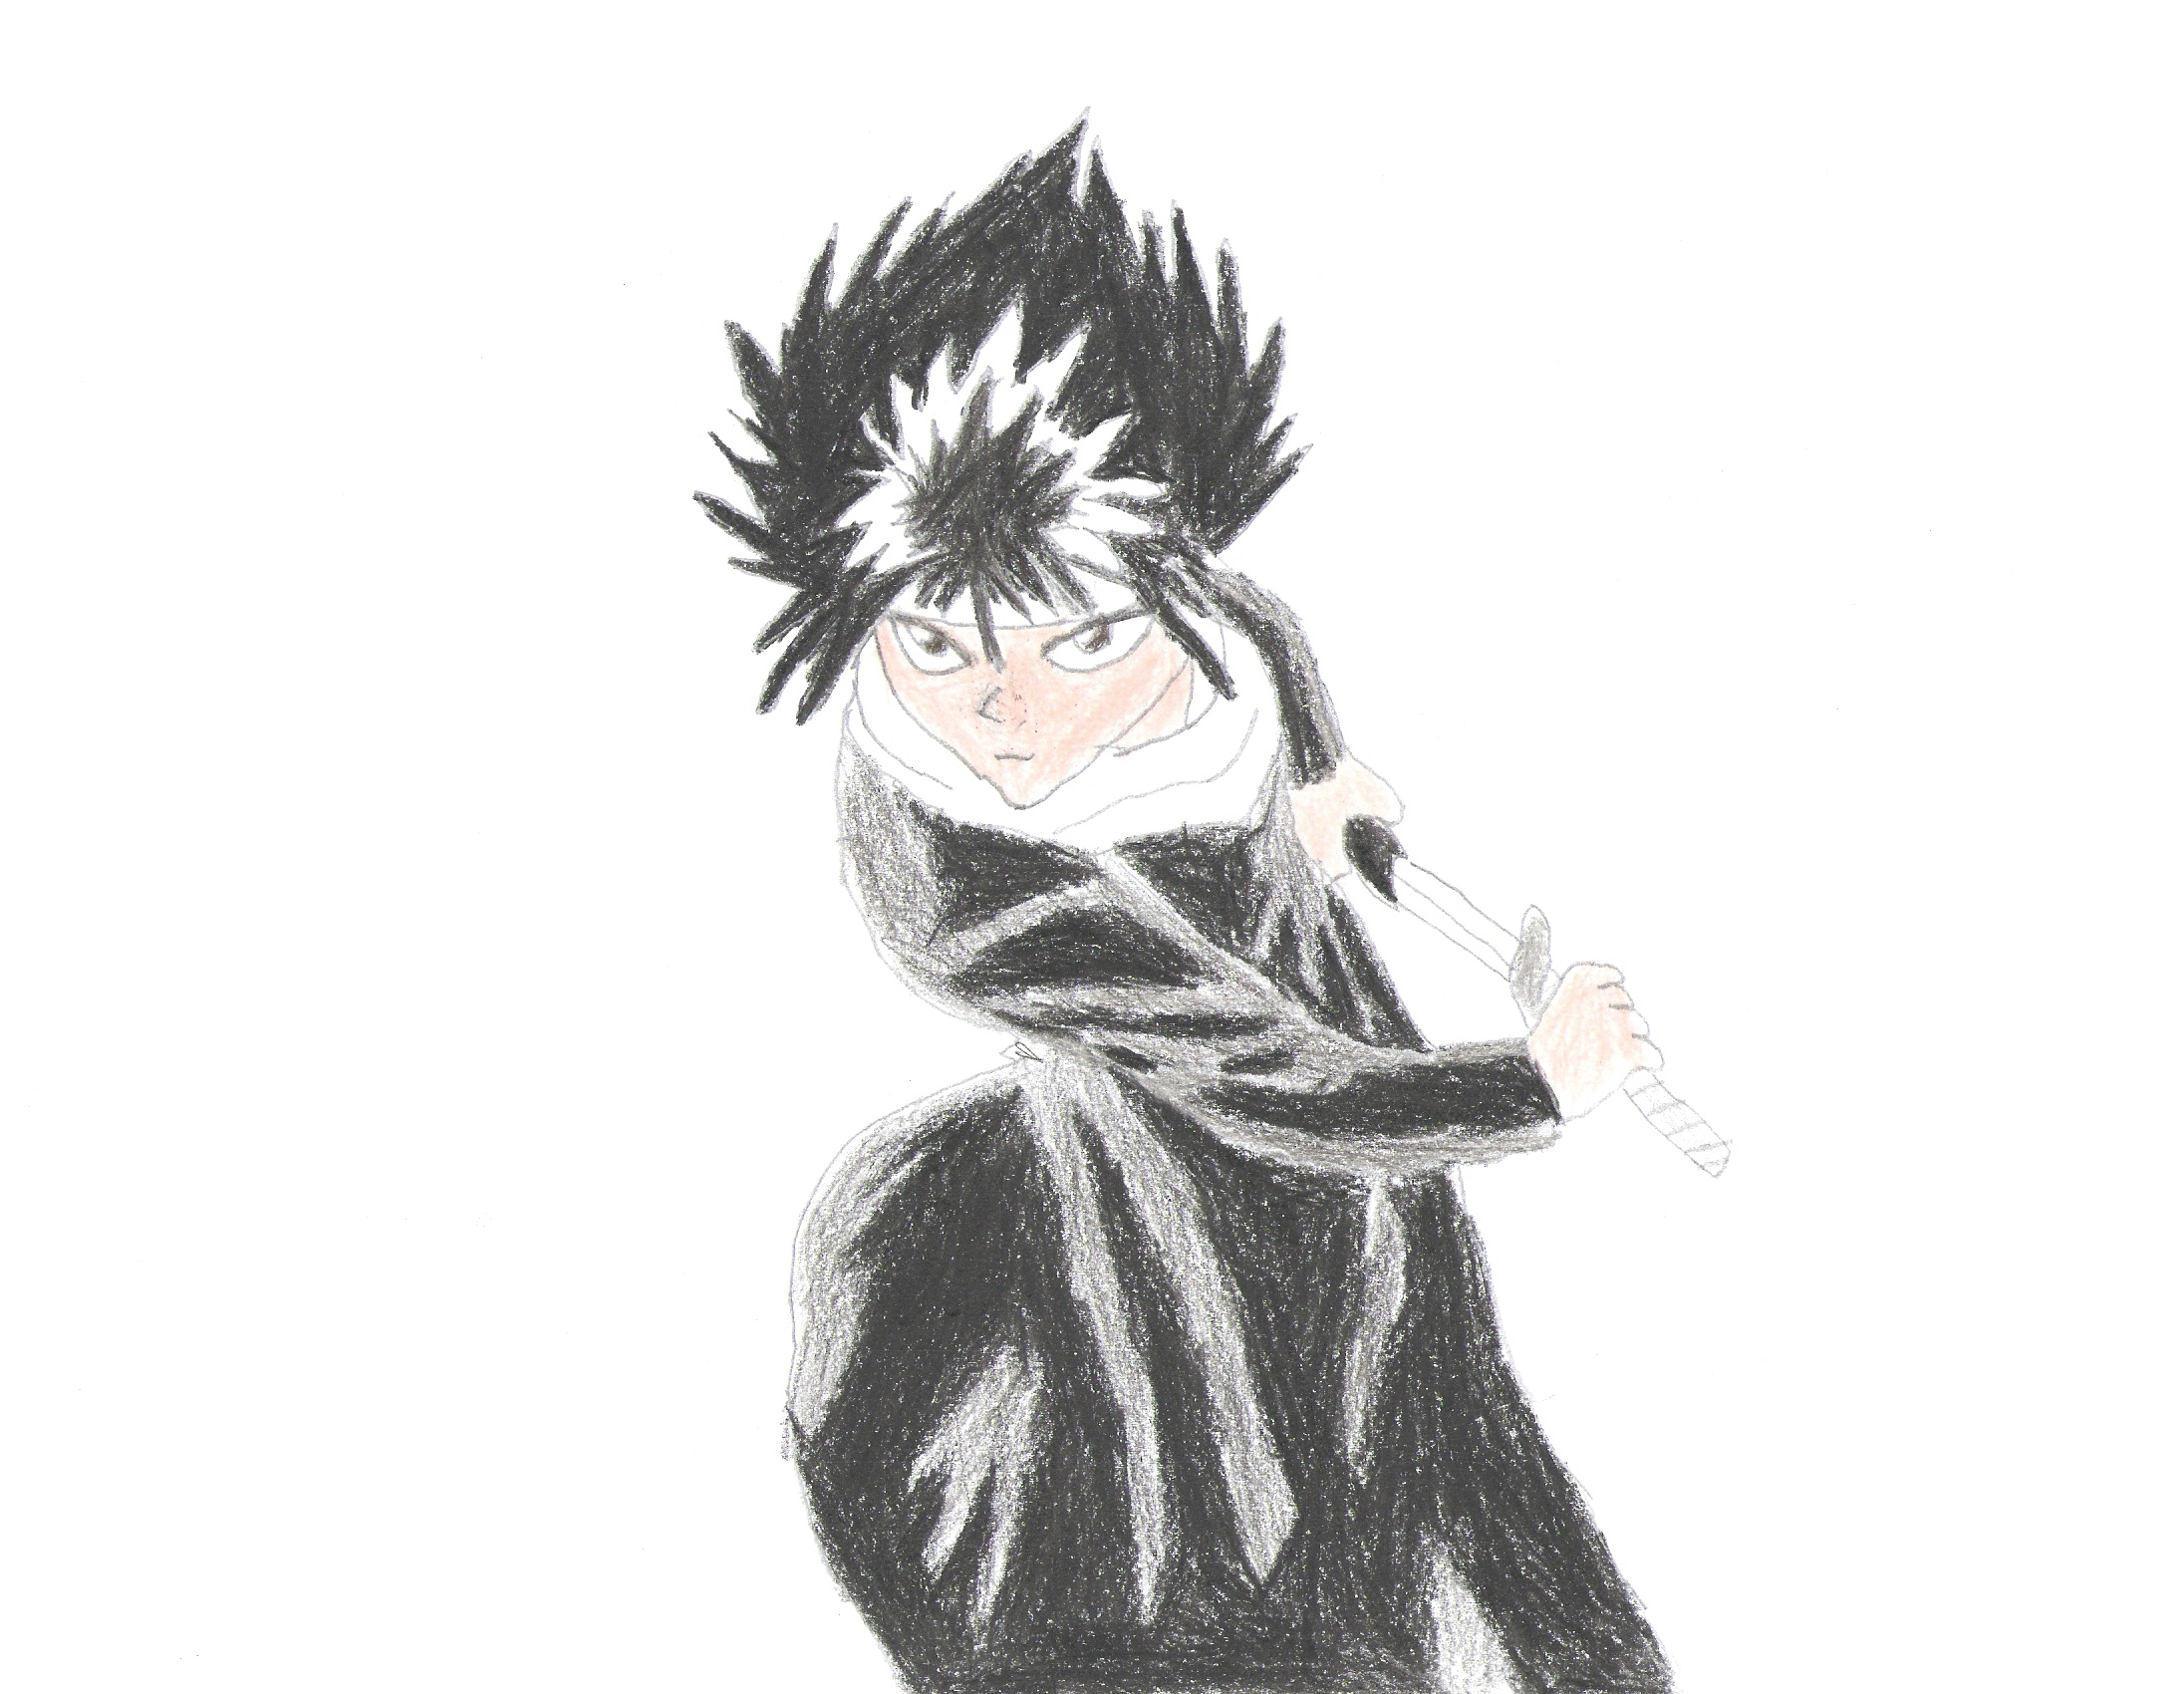 second hiei by knives7